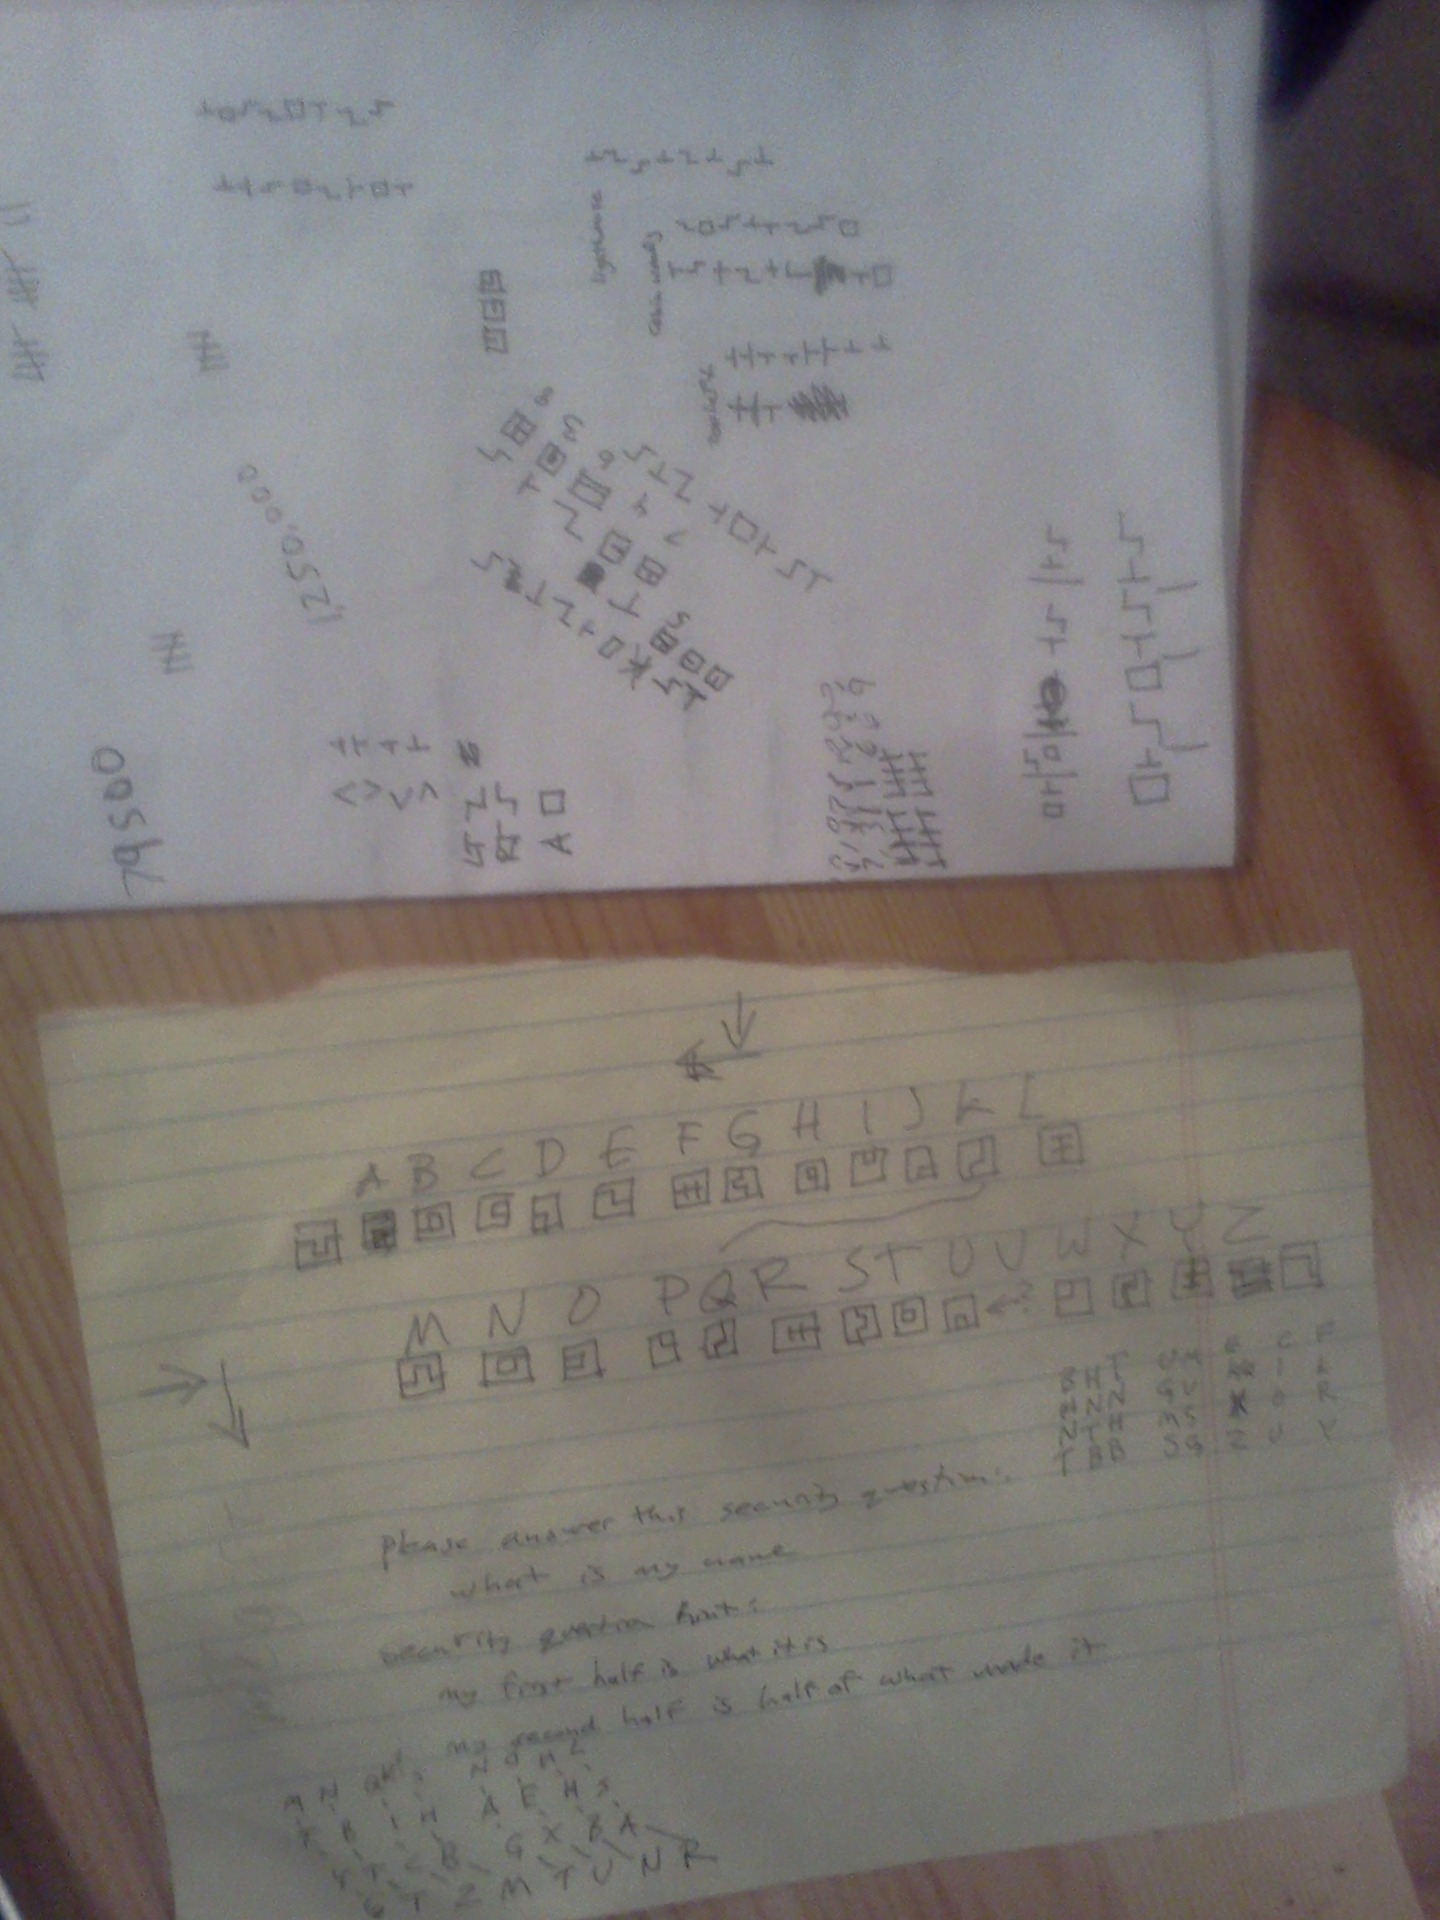 Some of the numbers on the white sheet are unrelated, but this is it for my Fez scribbles